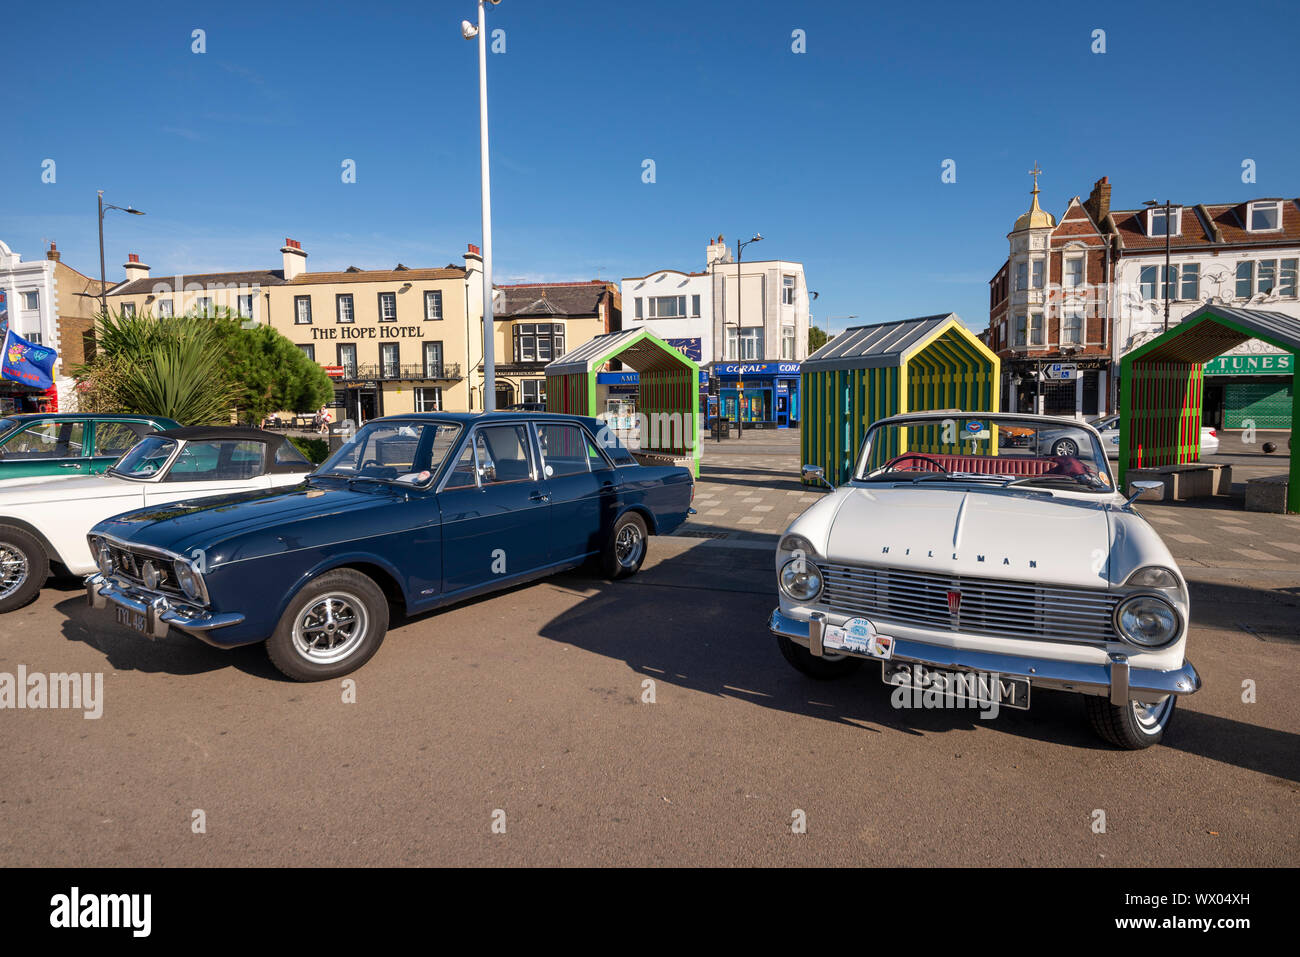 Cars on the Beach car show on Marine Parade, Southend on Sea, Essex, UK. Ford Cortina and Hillman Minx classic cars with coloured shelters Stock Photo